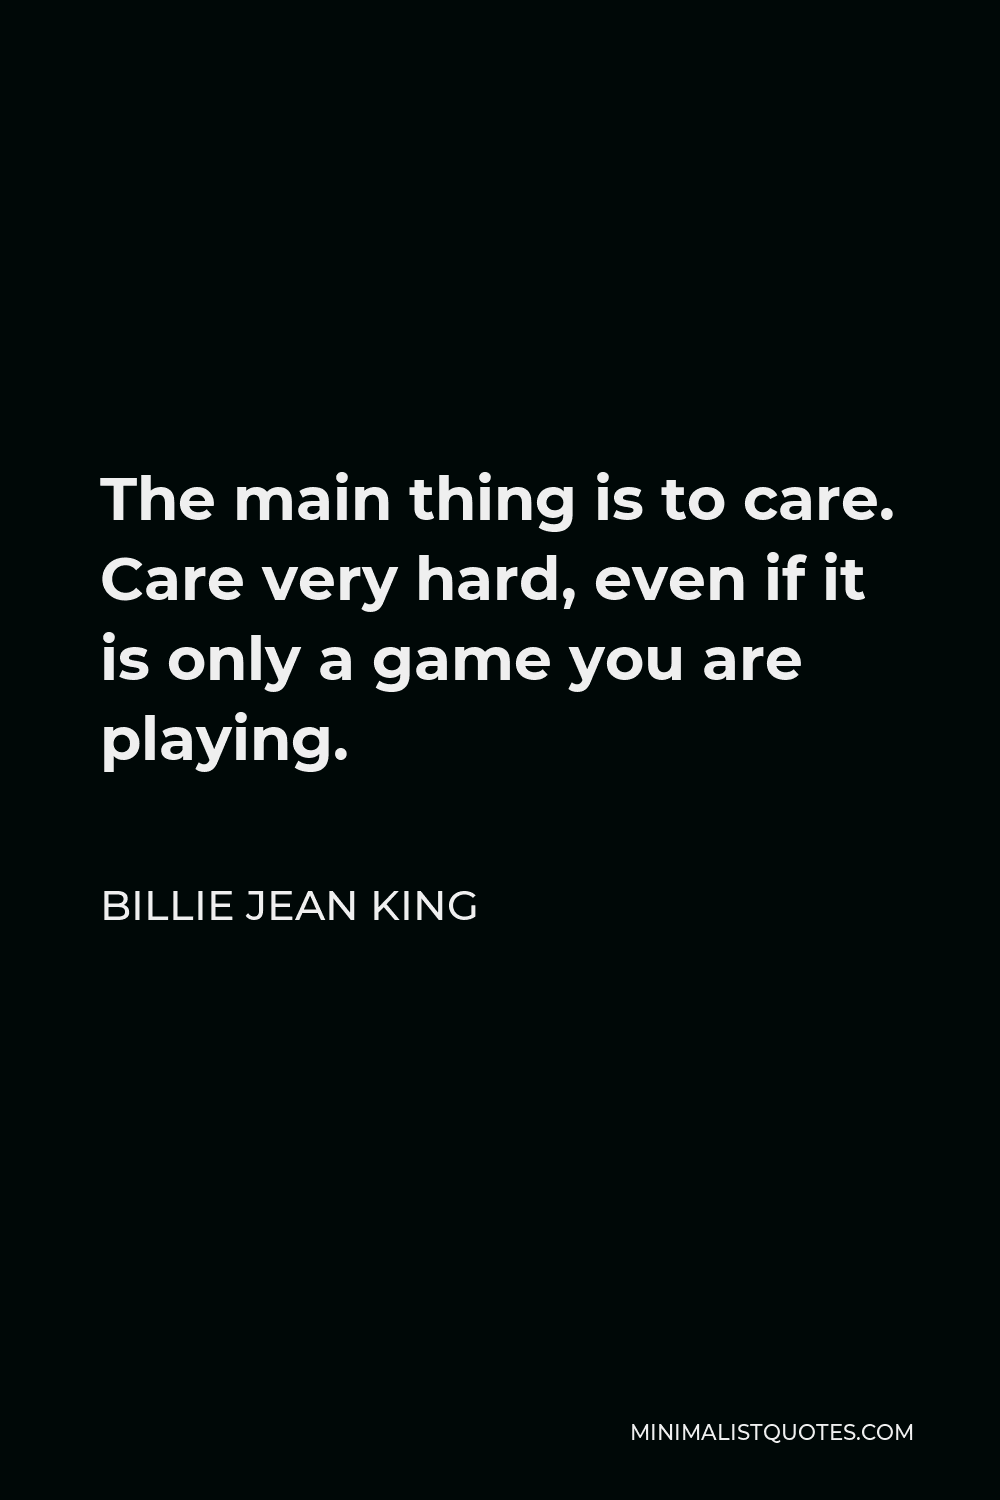 Billie Jean King Quote - The main thing is to care. Care very hard, even if it is only a game you are playing.